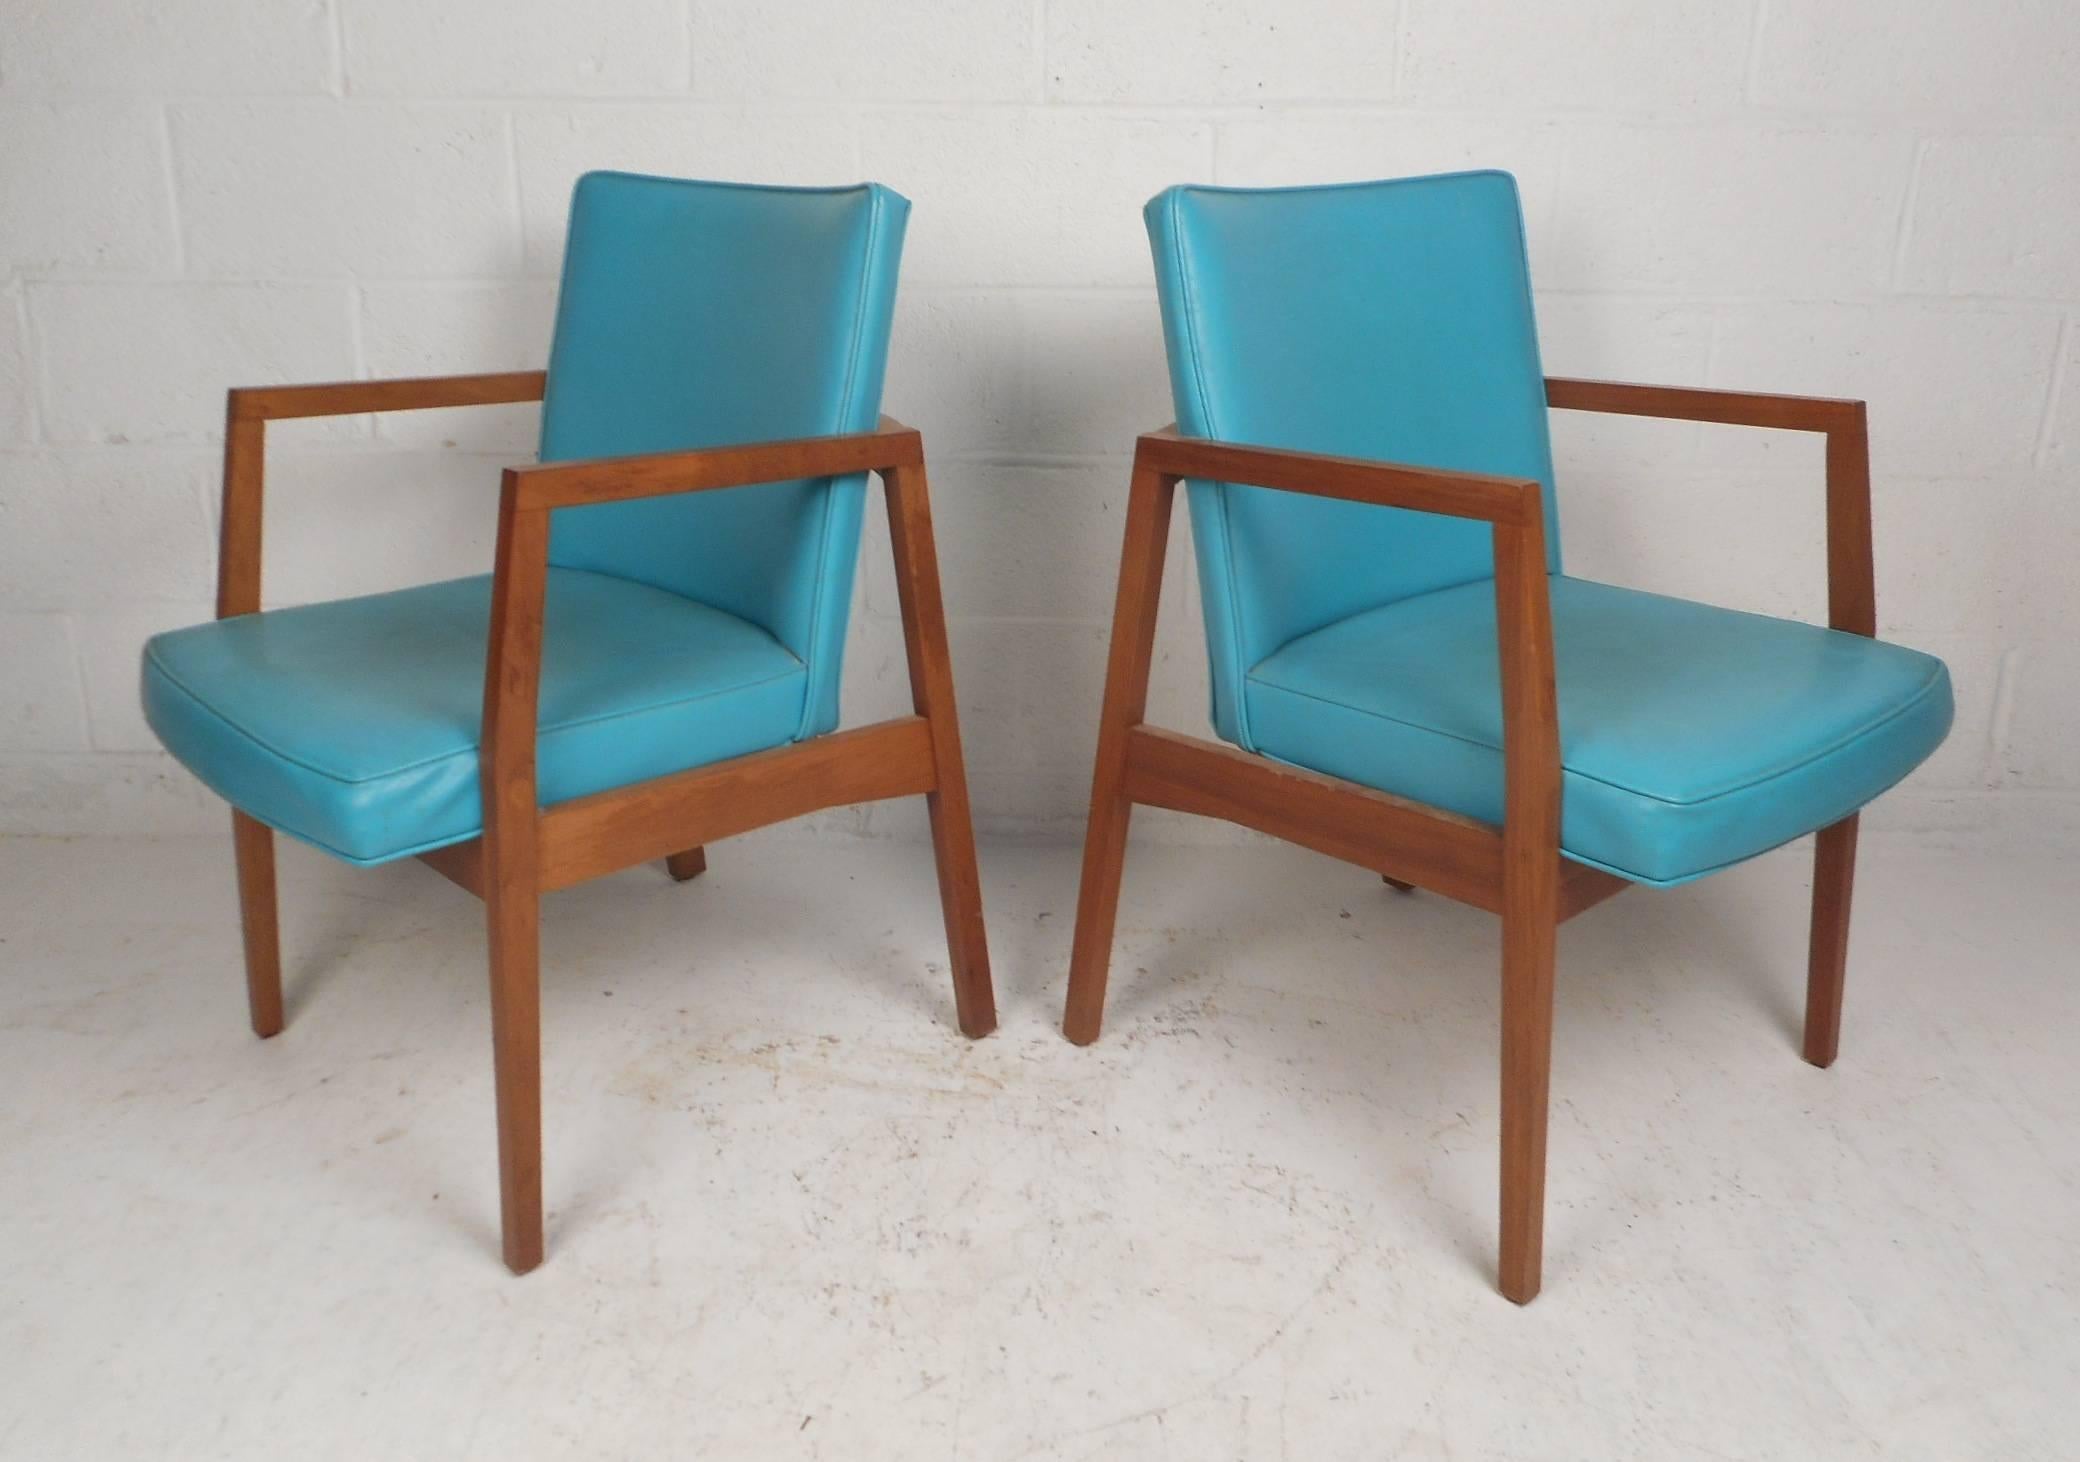 American Mid-Century Modern Lounge Chairs by J.B. Van Sciver Co.